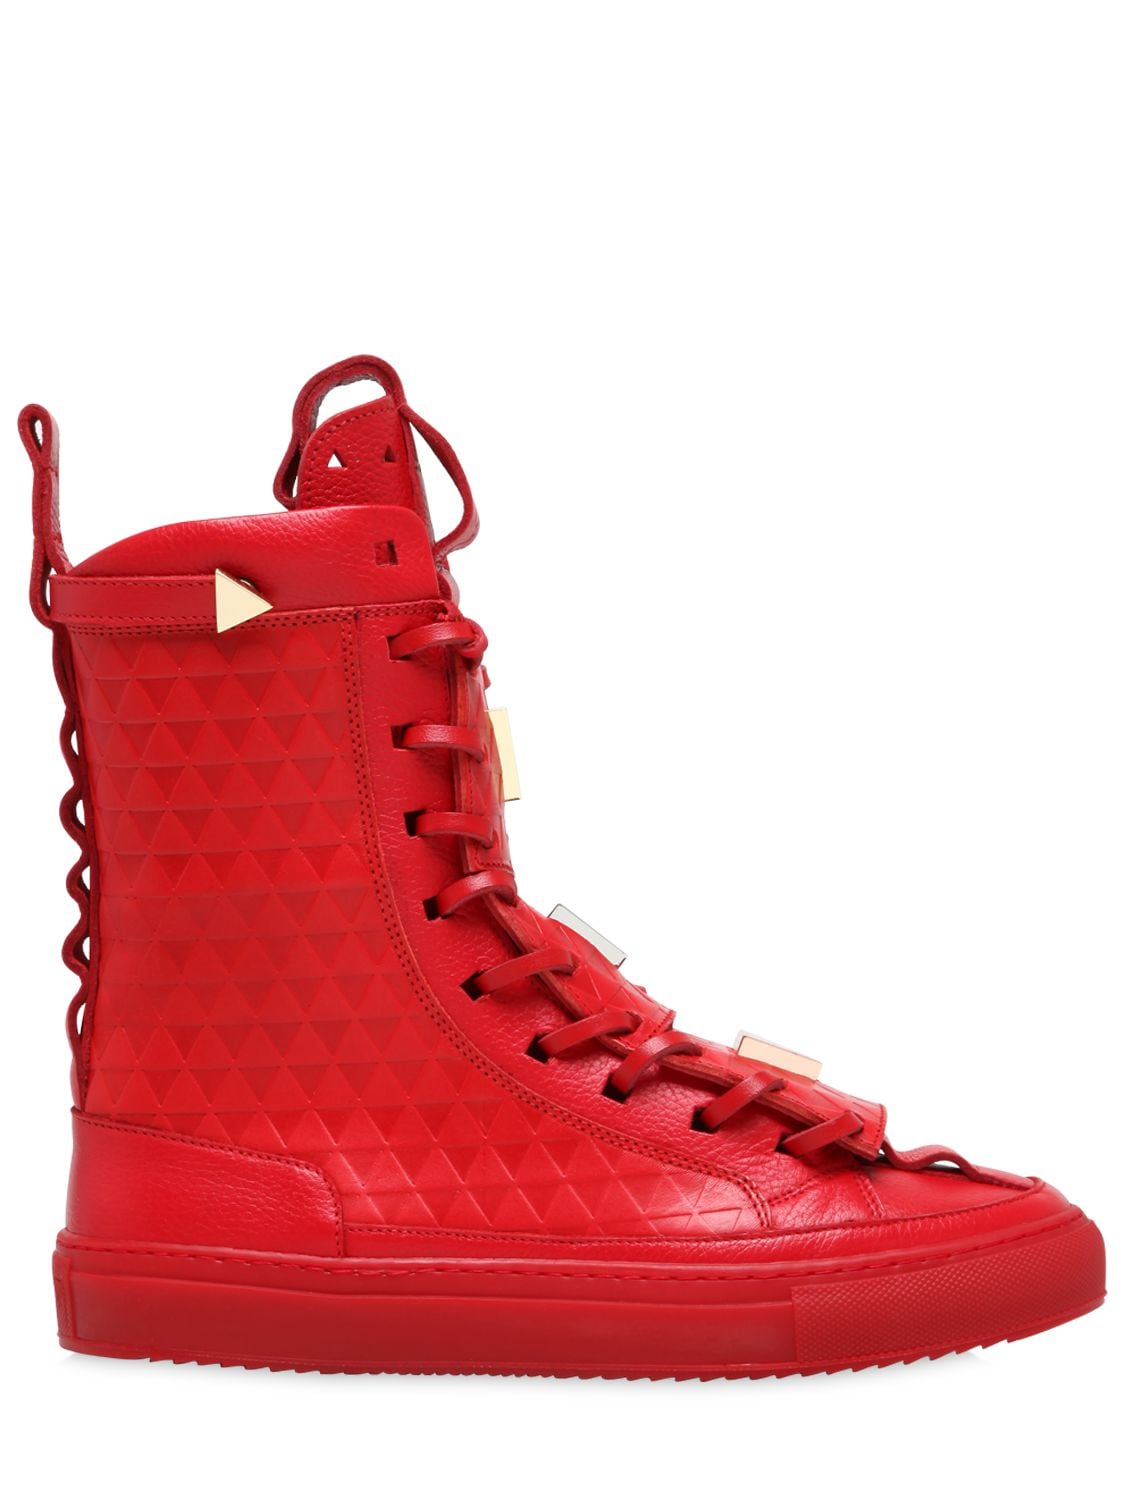 K1X X PATRICK MOHR LIMITED EDITION LEATHER SNEAKER BOOTS,64I0JM001-NjYwMA2